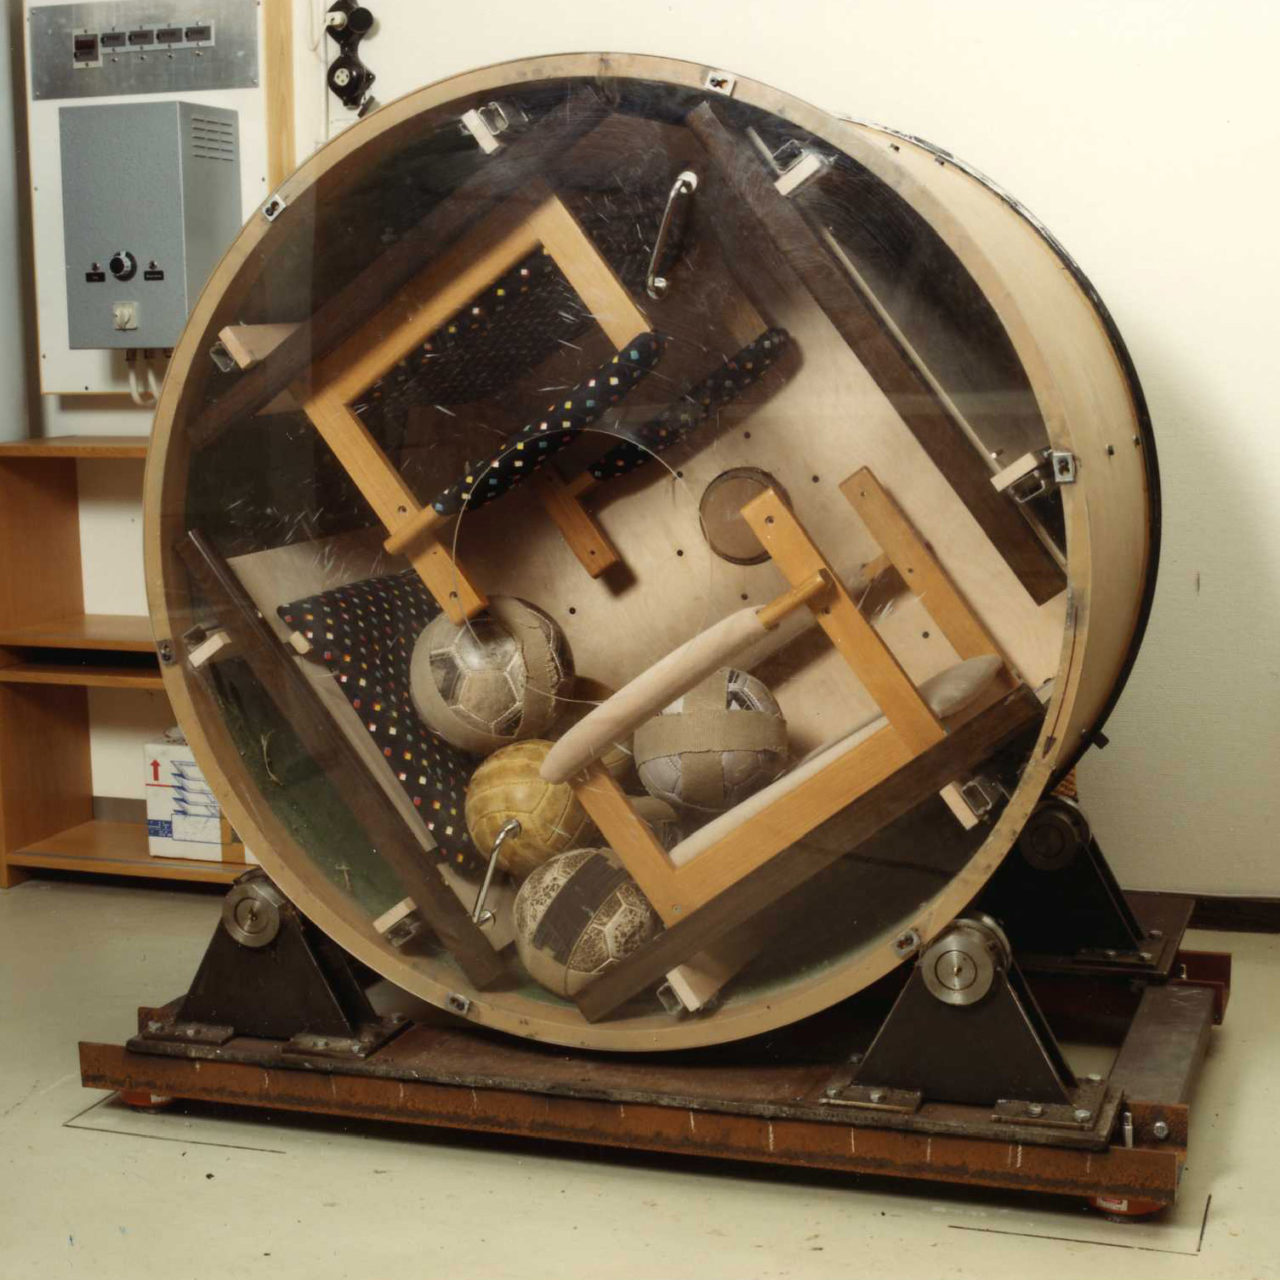 Crudely built testing machine, a spinning round shape in which armchairs are being pounded by soccer balls.